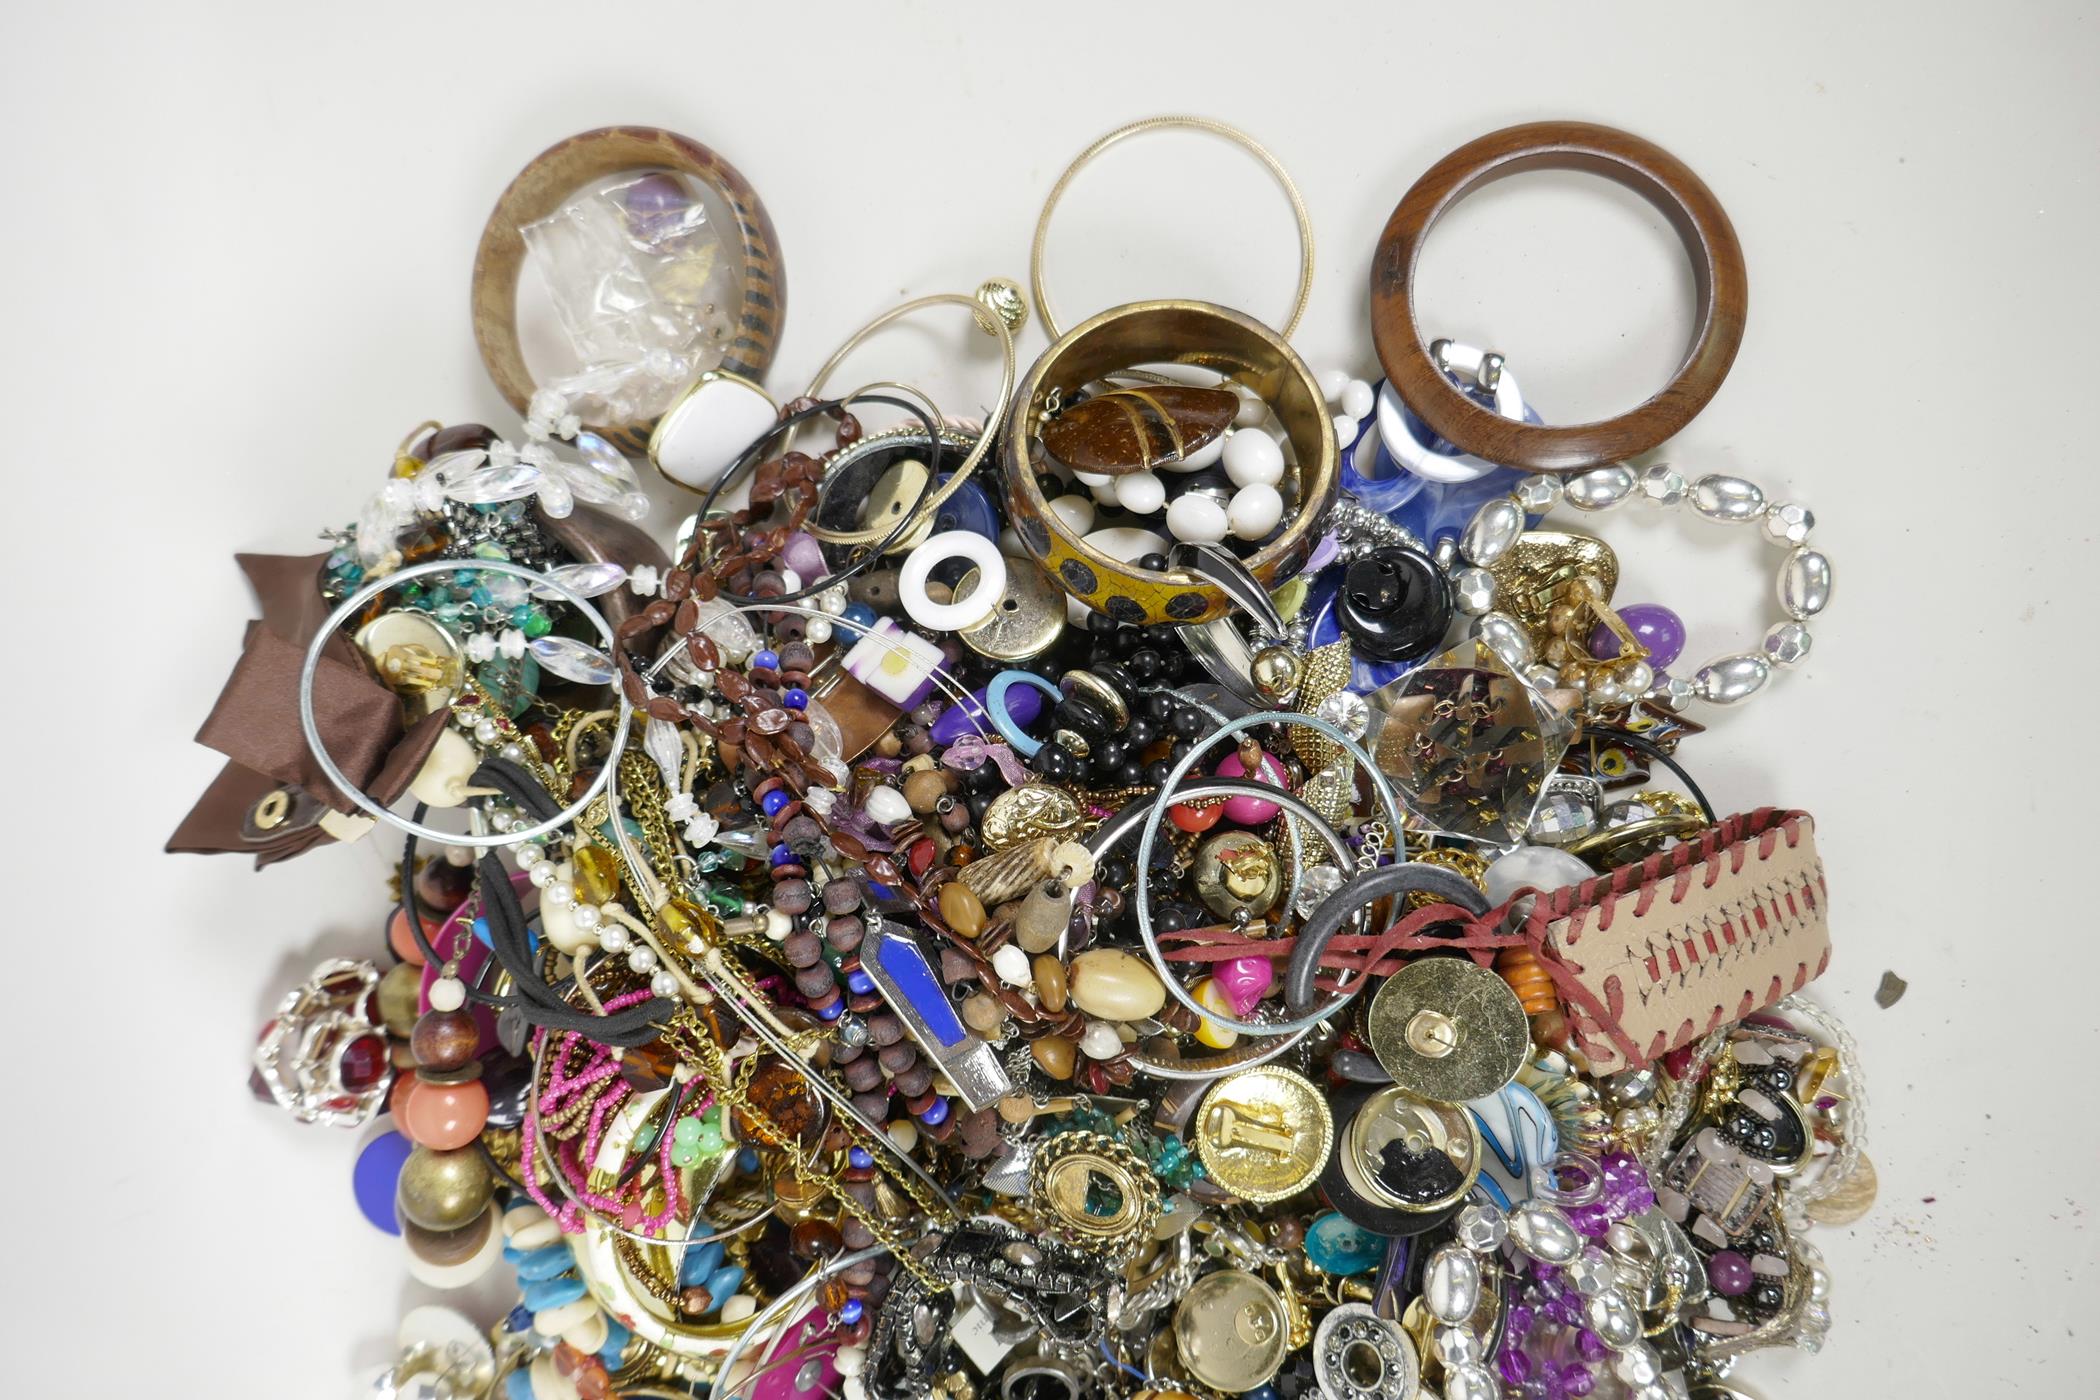 A large quantity of costume jewellery including bangles, necklaces, earrings etc - Image 4 of 4